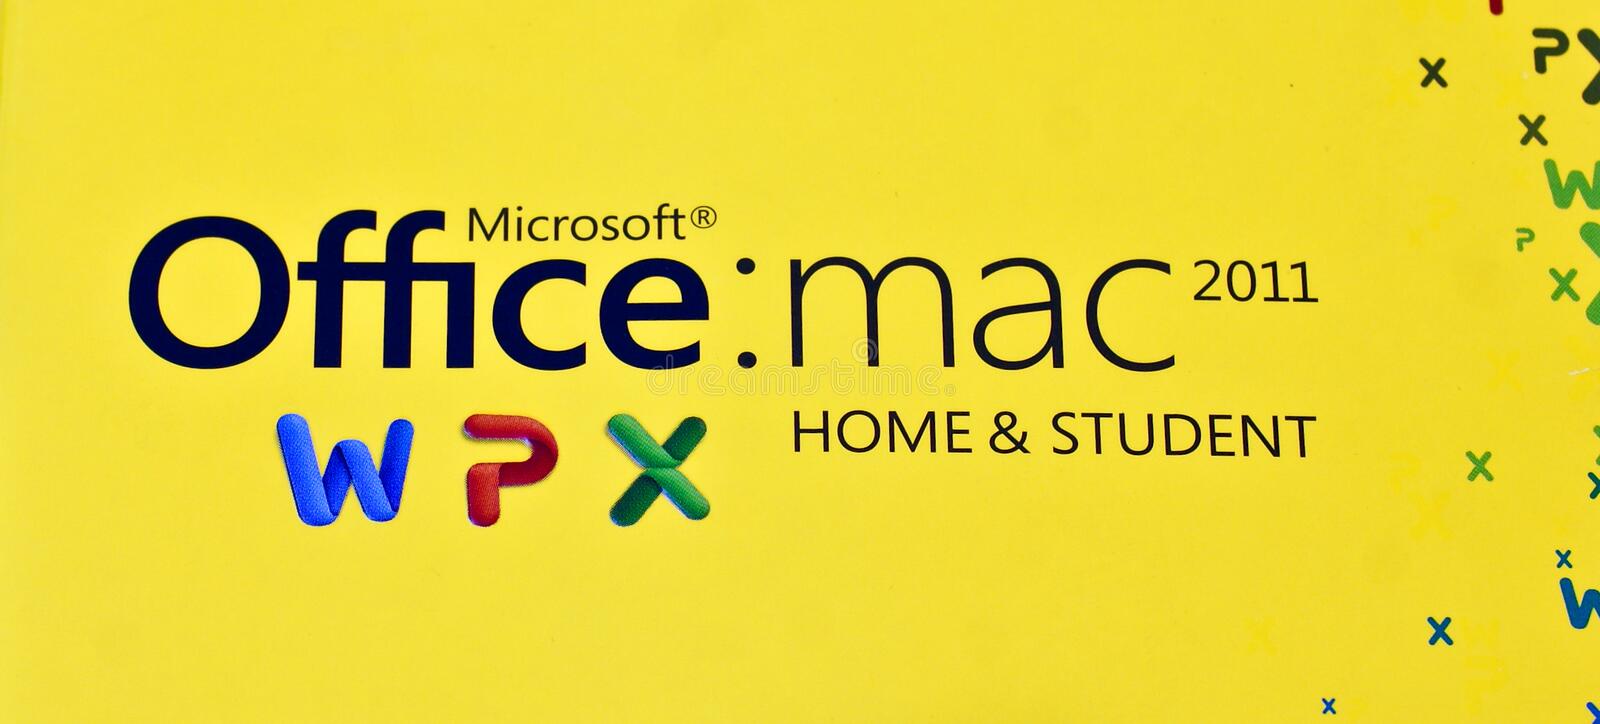 office mac free for students